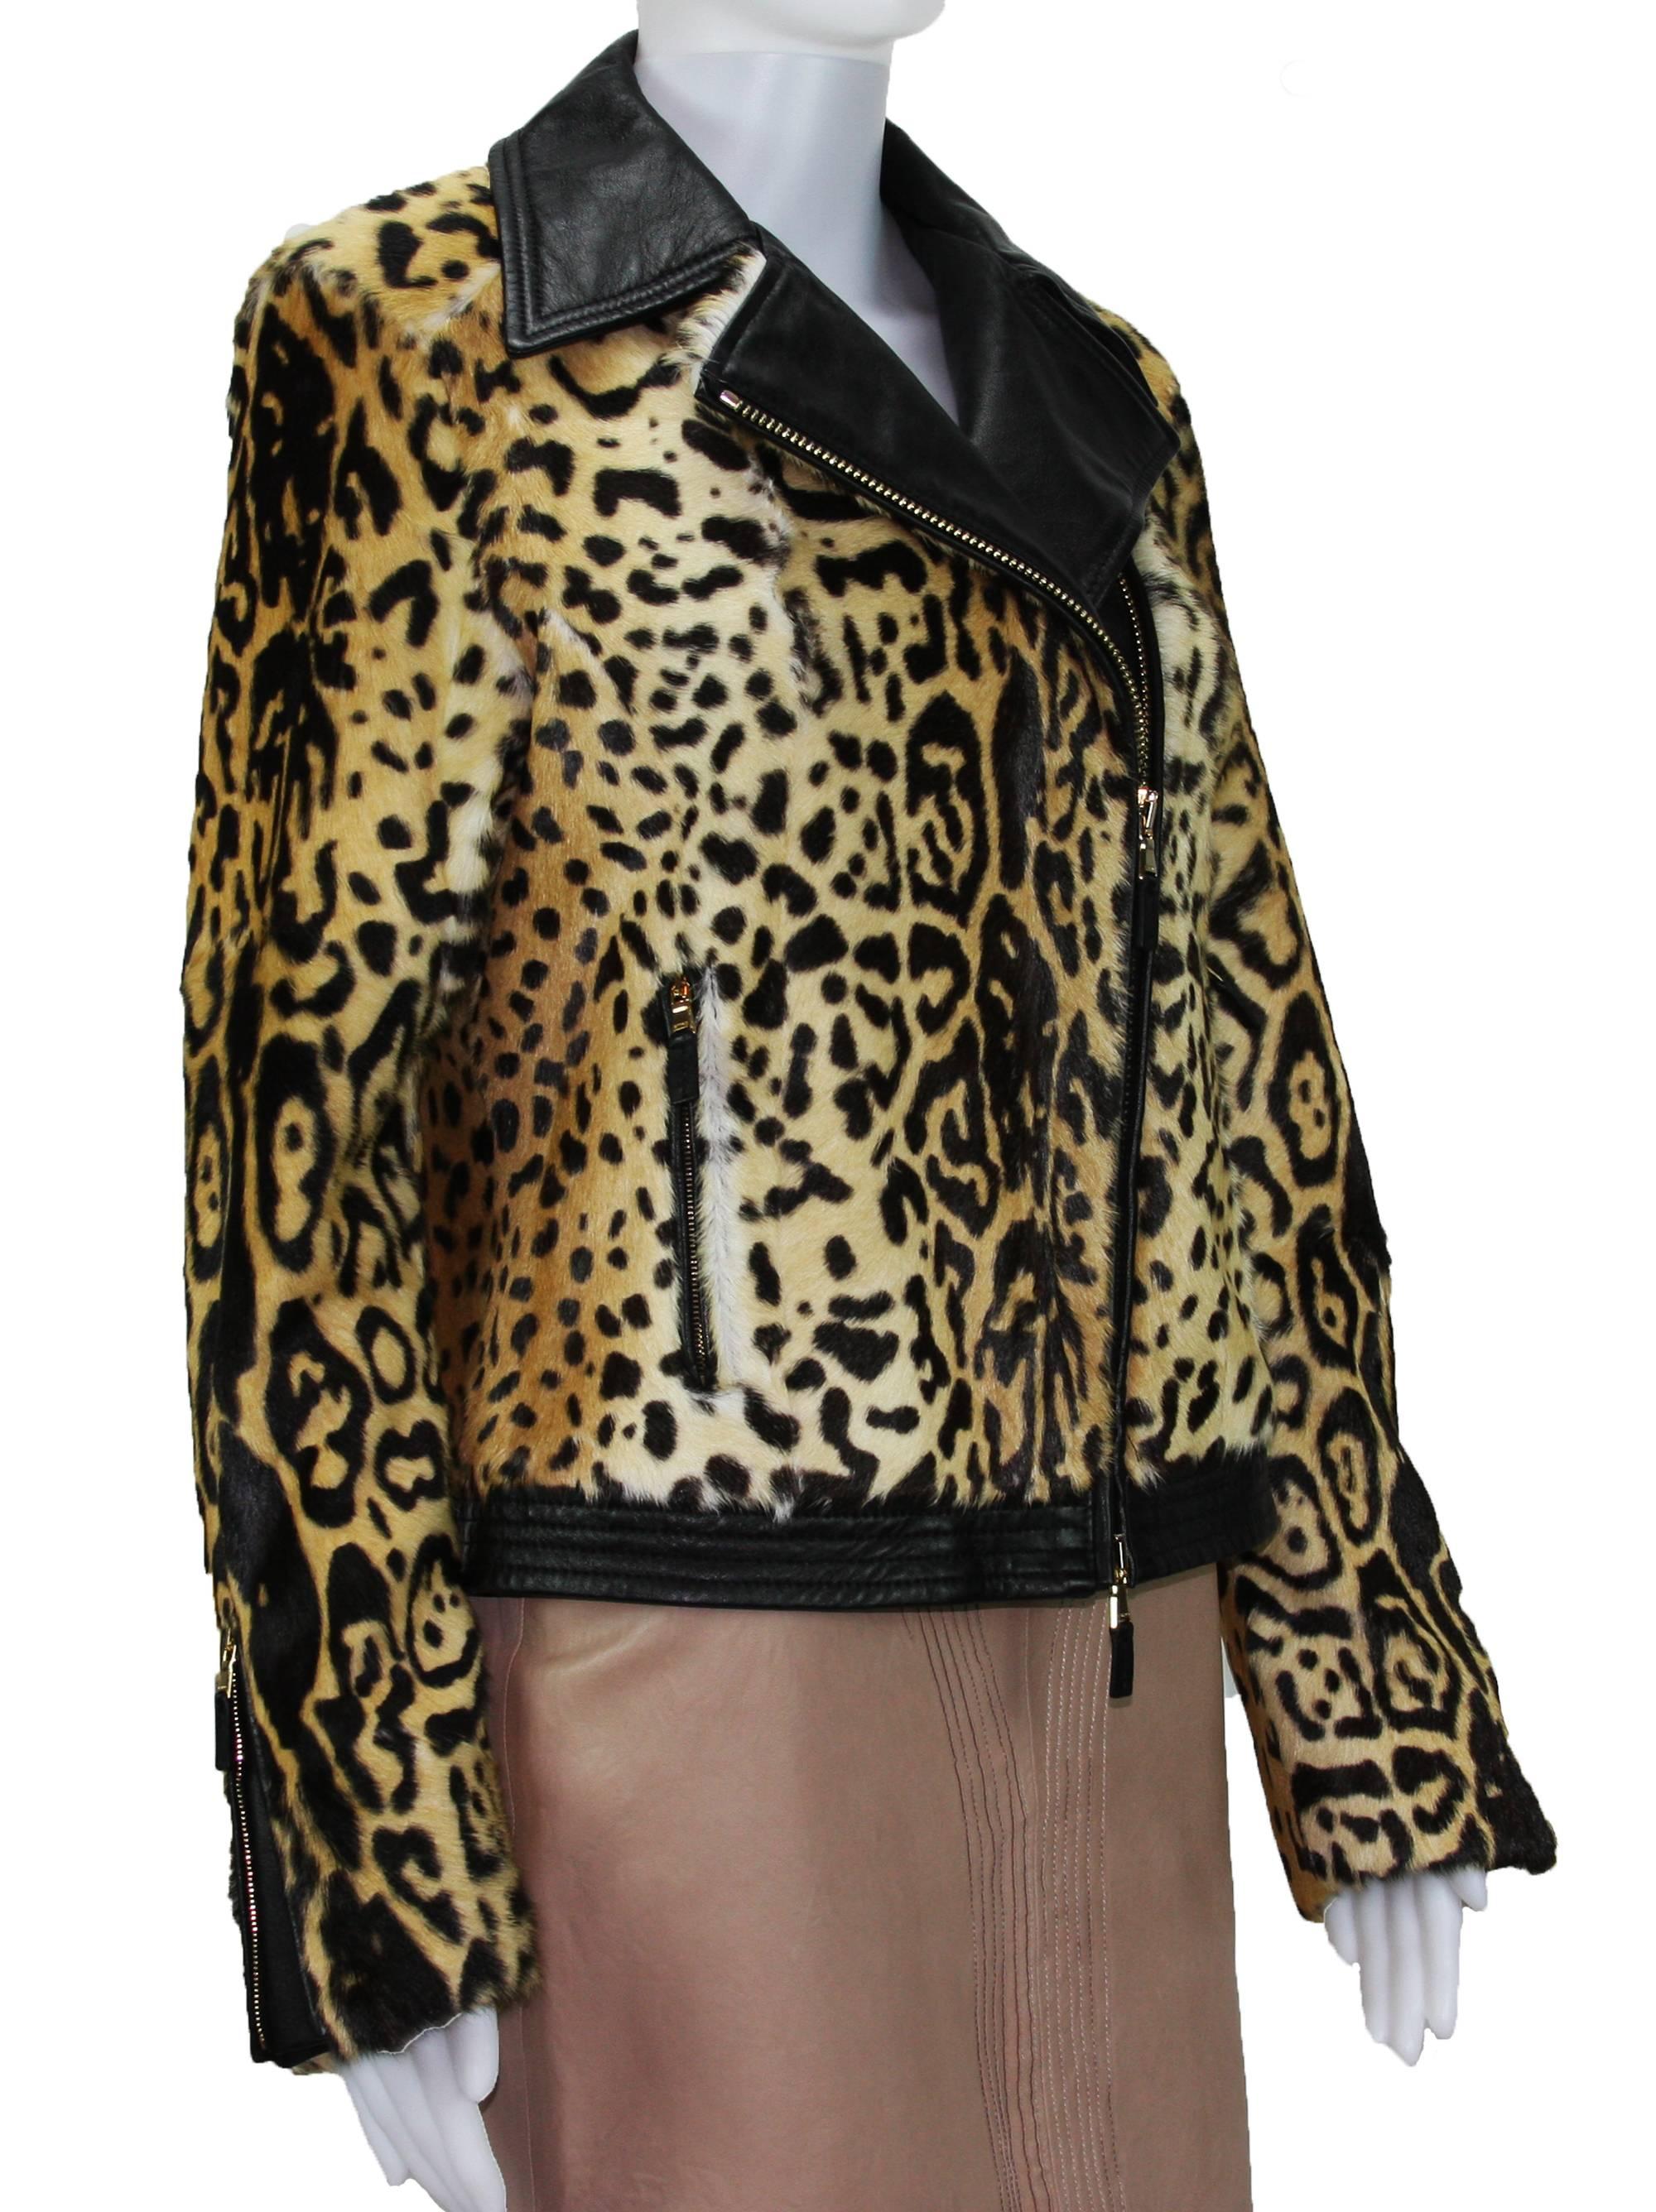 New Etro Leopard Leather Print Moto Jacket
Italian Size 42 – US 6/8
100% LAMB Leopard Print Leather
Colors – Black / Yellow
Zipper Closure
Two Front Zip Closure Pockets
Gusseted Zip Cuffs
Fully Lined & Padded
Measurements: Length – 21 inch, Sleeve –